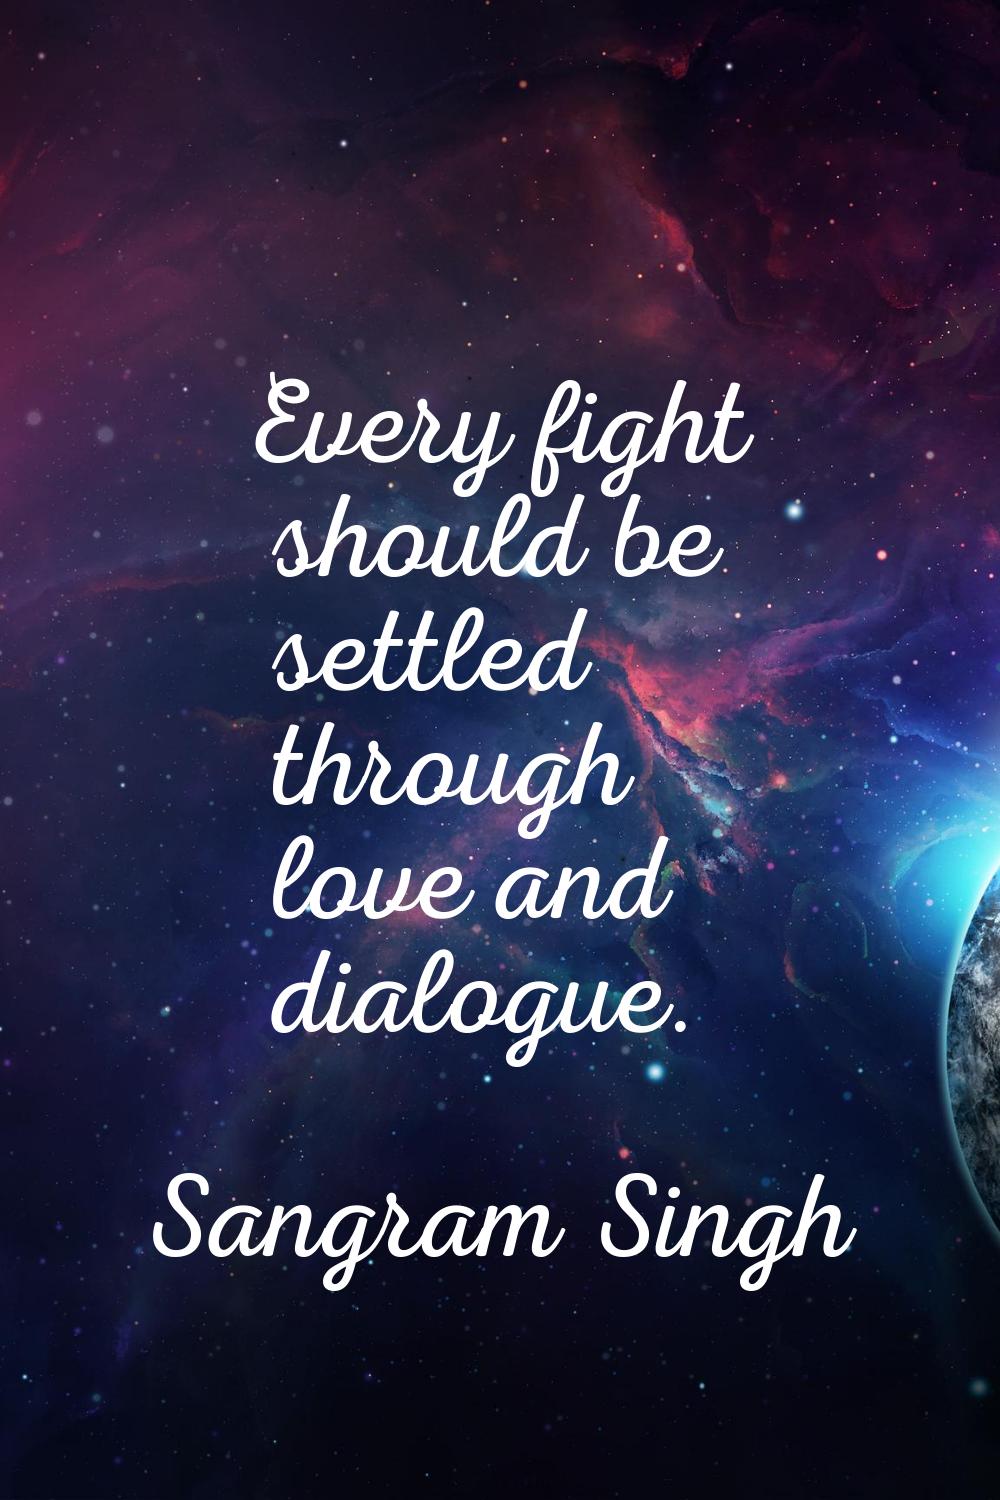 Every fight should be settled through love and dialogue.